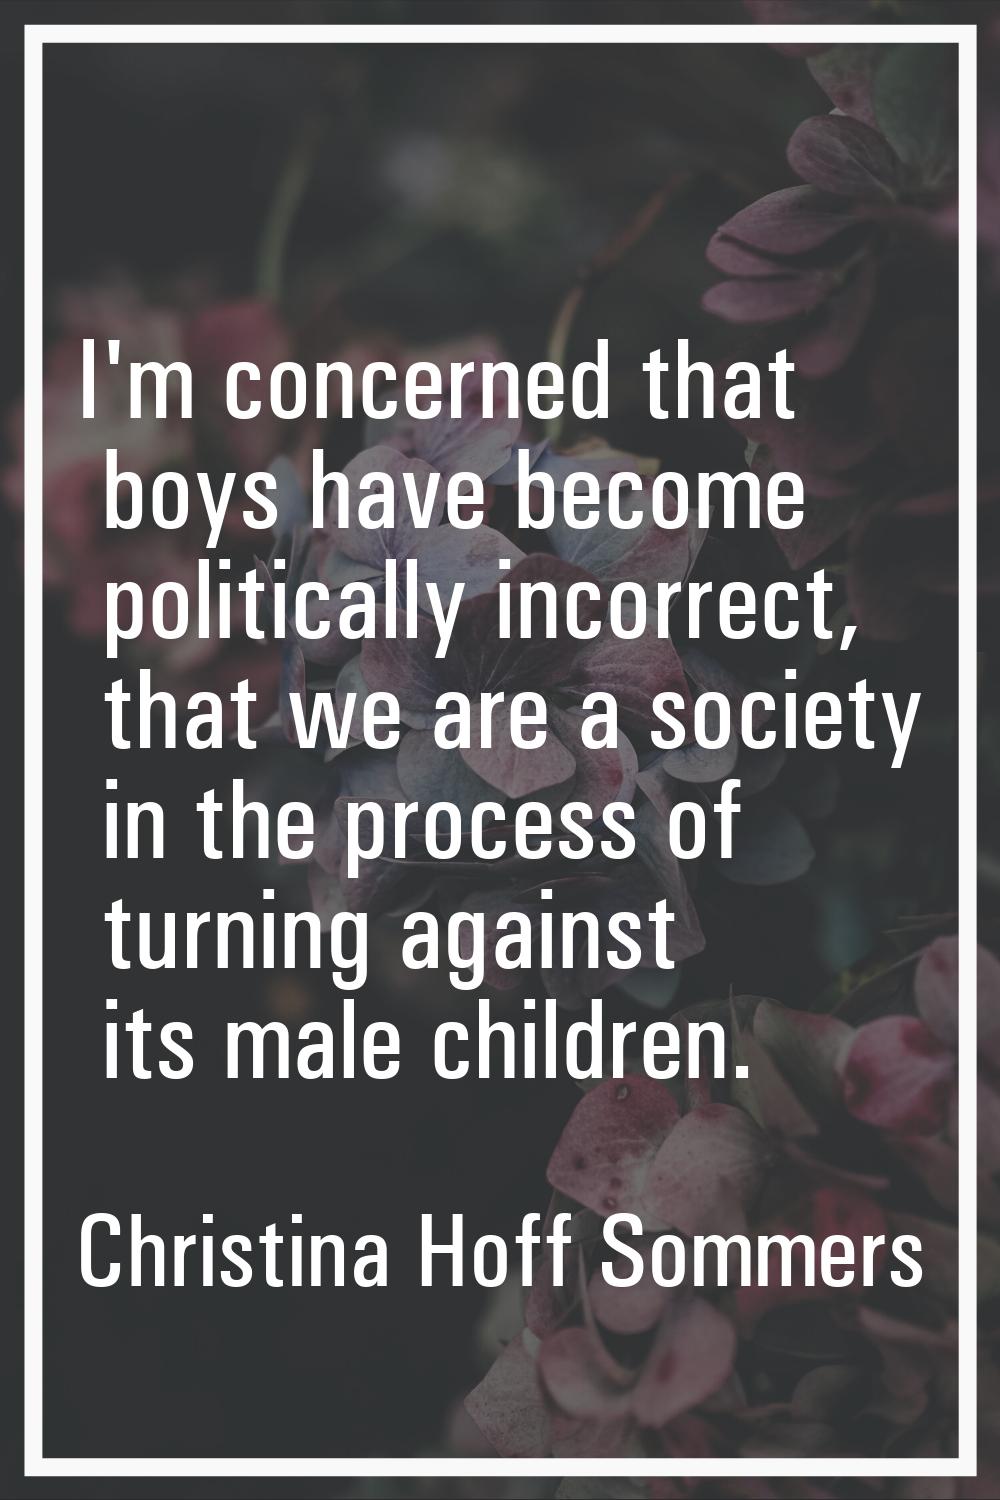 I'm concerned that boys have become politically incorrect, that we are a society in the process of 